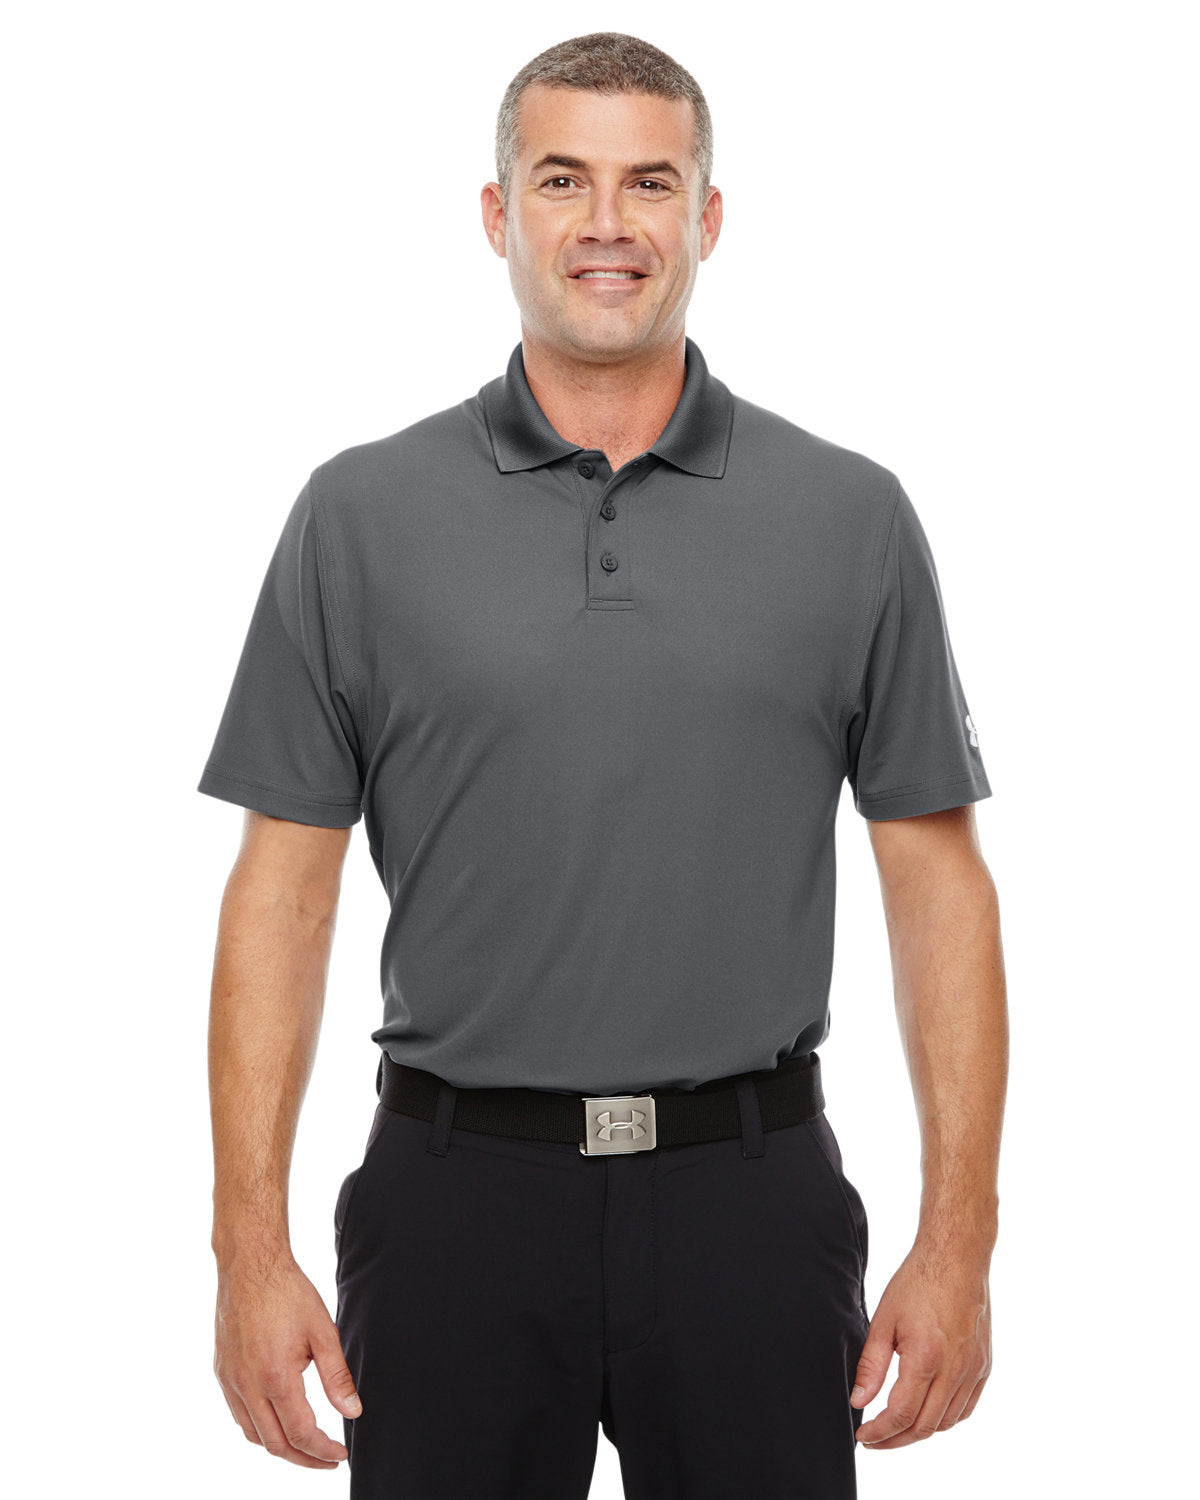 UNDER ARMOUR Men's Corp Performance Polo